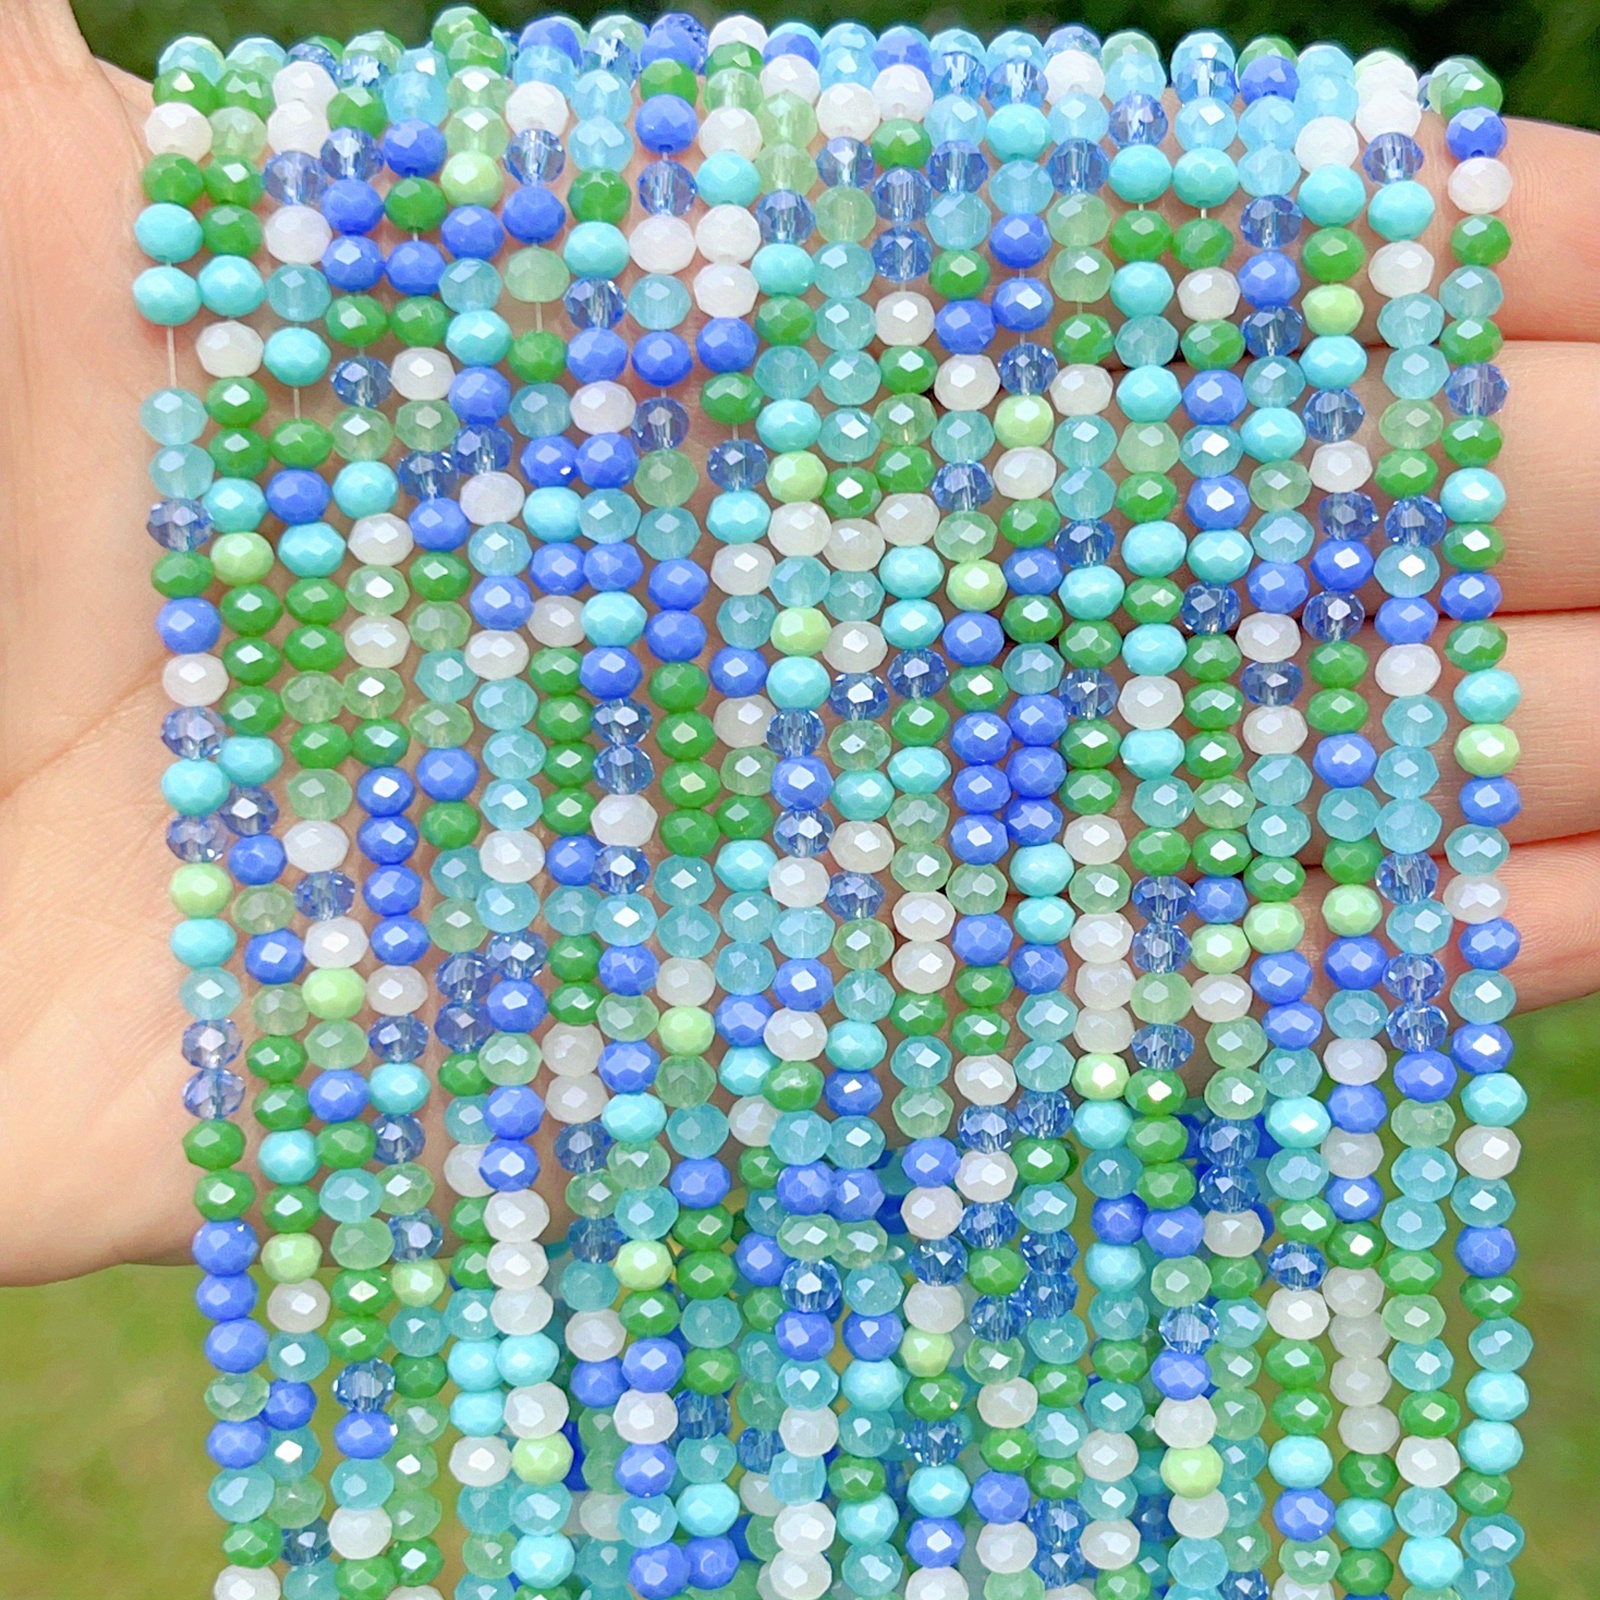 3mm Glass Faceted Beads, Green Glass Beads, Bracelet Beads, Seed Beads, Ab  Color Coated, Jewelry Beads 